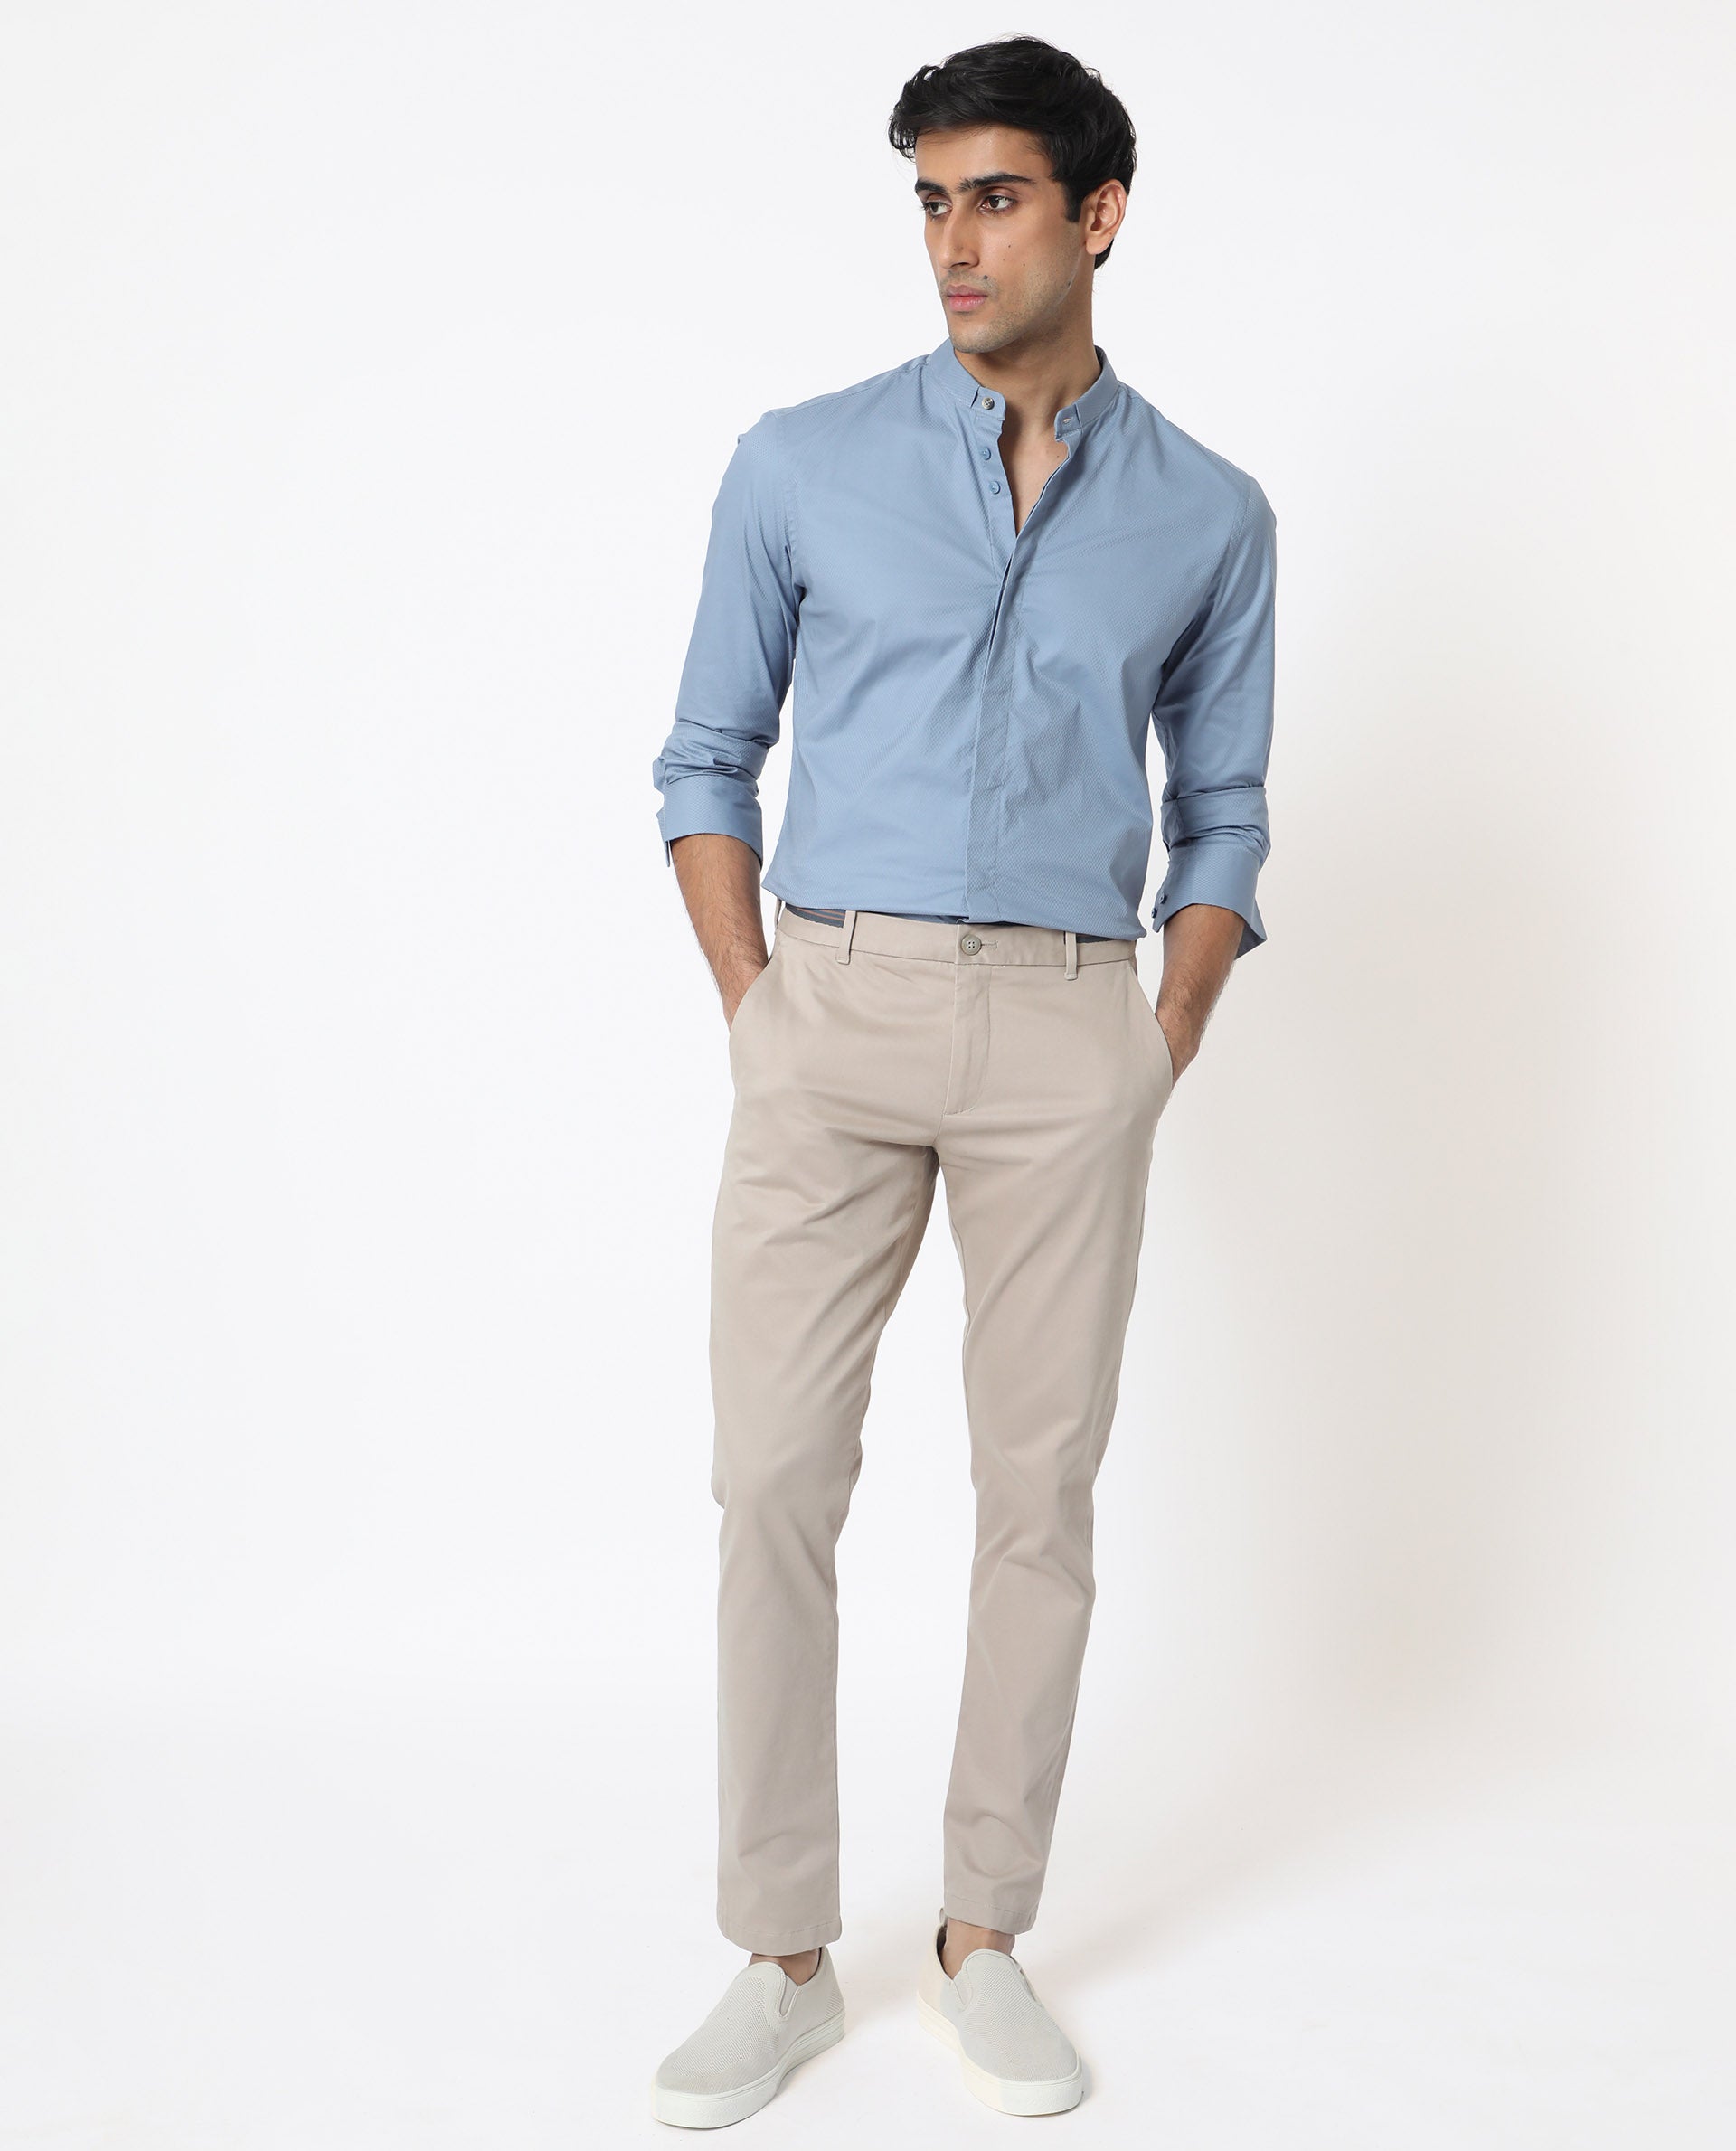 What Color Pants Go With Navy Blue Shirt - 09 Options To Try In 2023